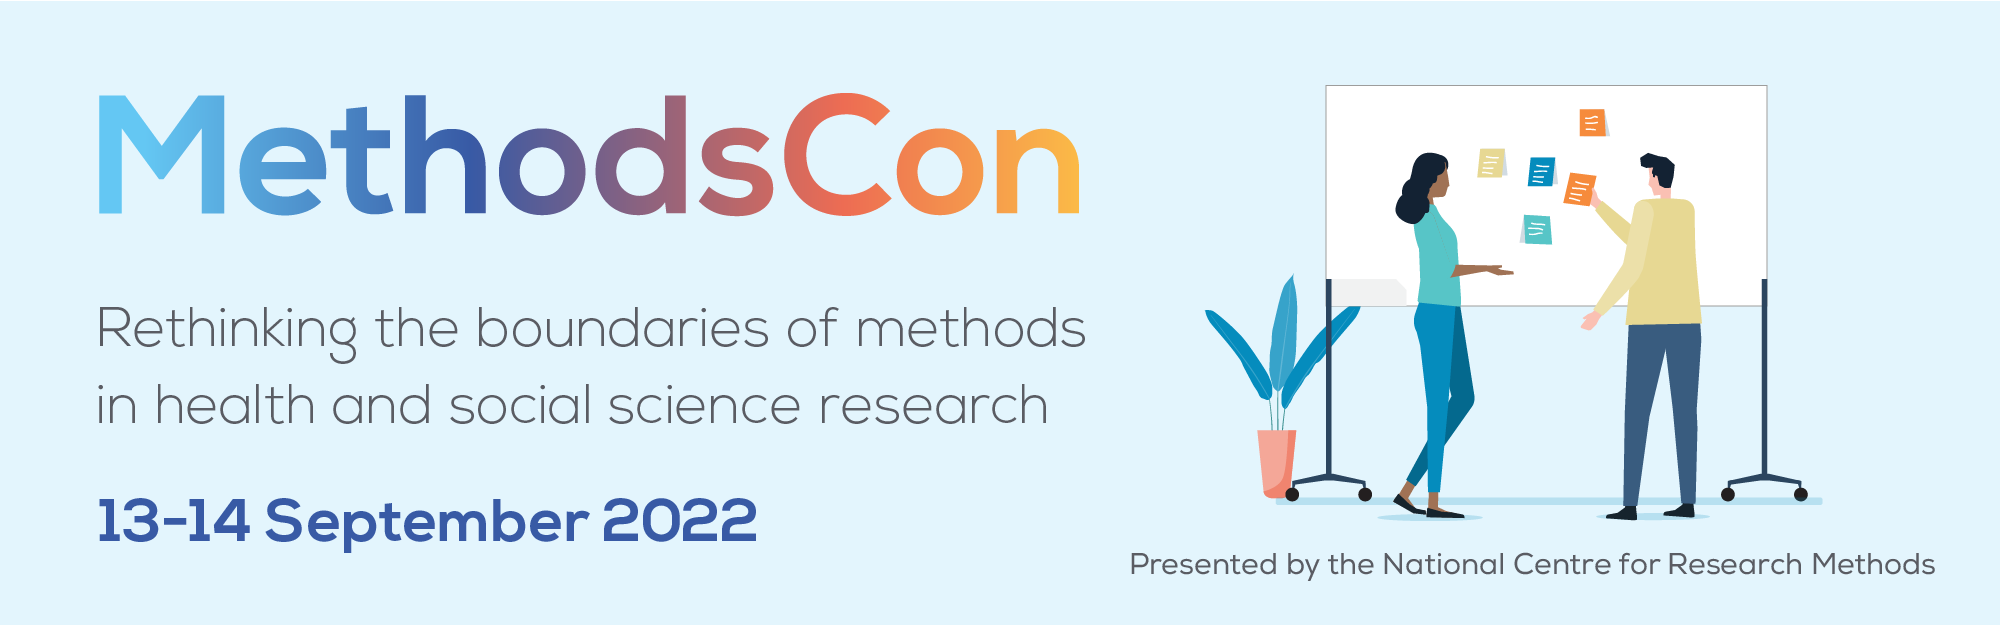 MethodsCon banner, showing the date of the event on 13-14 September 2022 and the theme, which is rethinking the boundaries of methods in health and social science research